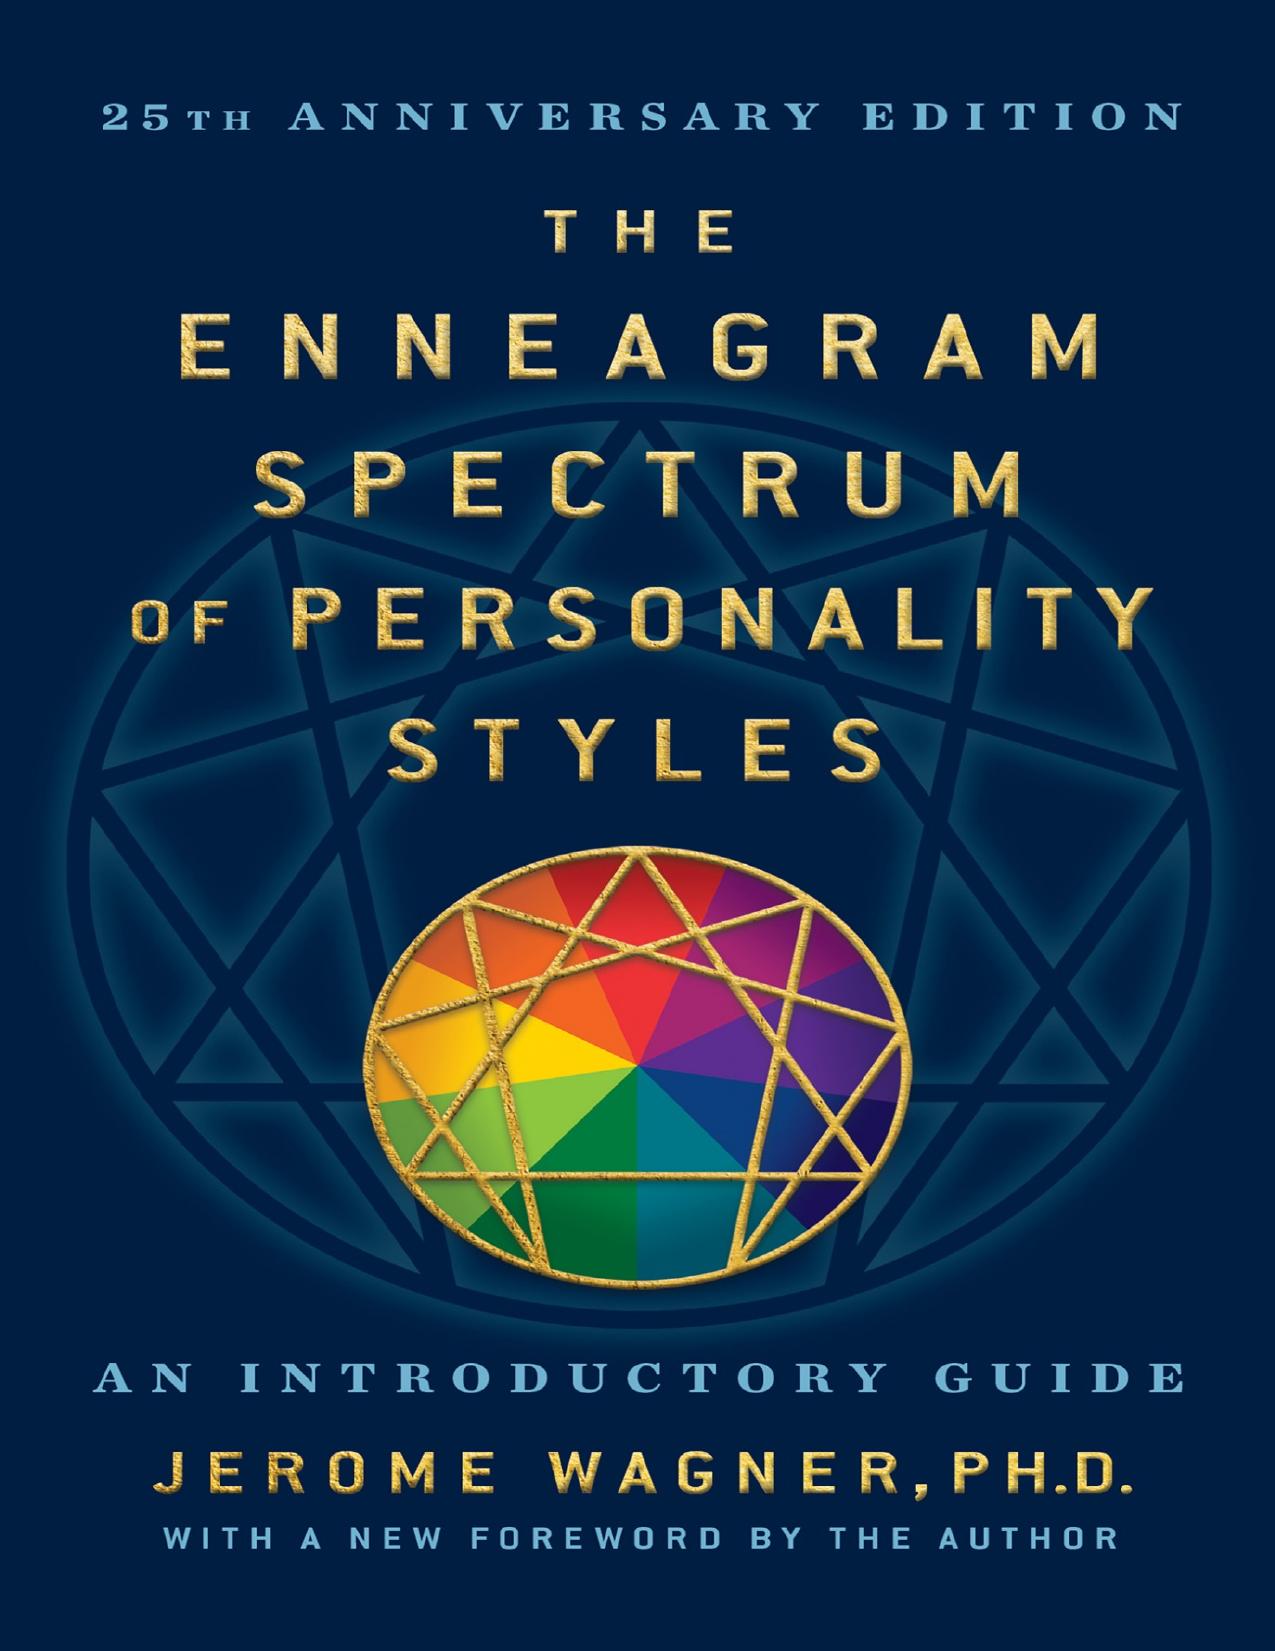 (eBook PDF)The Enneagram Spectrum of Personality Styles 2E: 25th Anniversary Edition by Jerome Wagner, Ph.D.